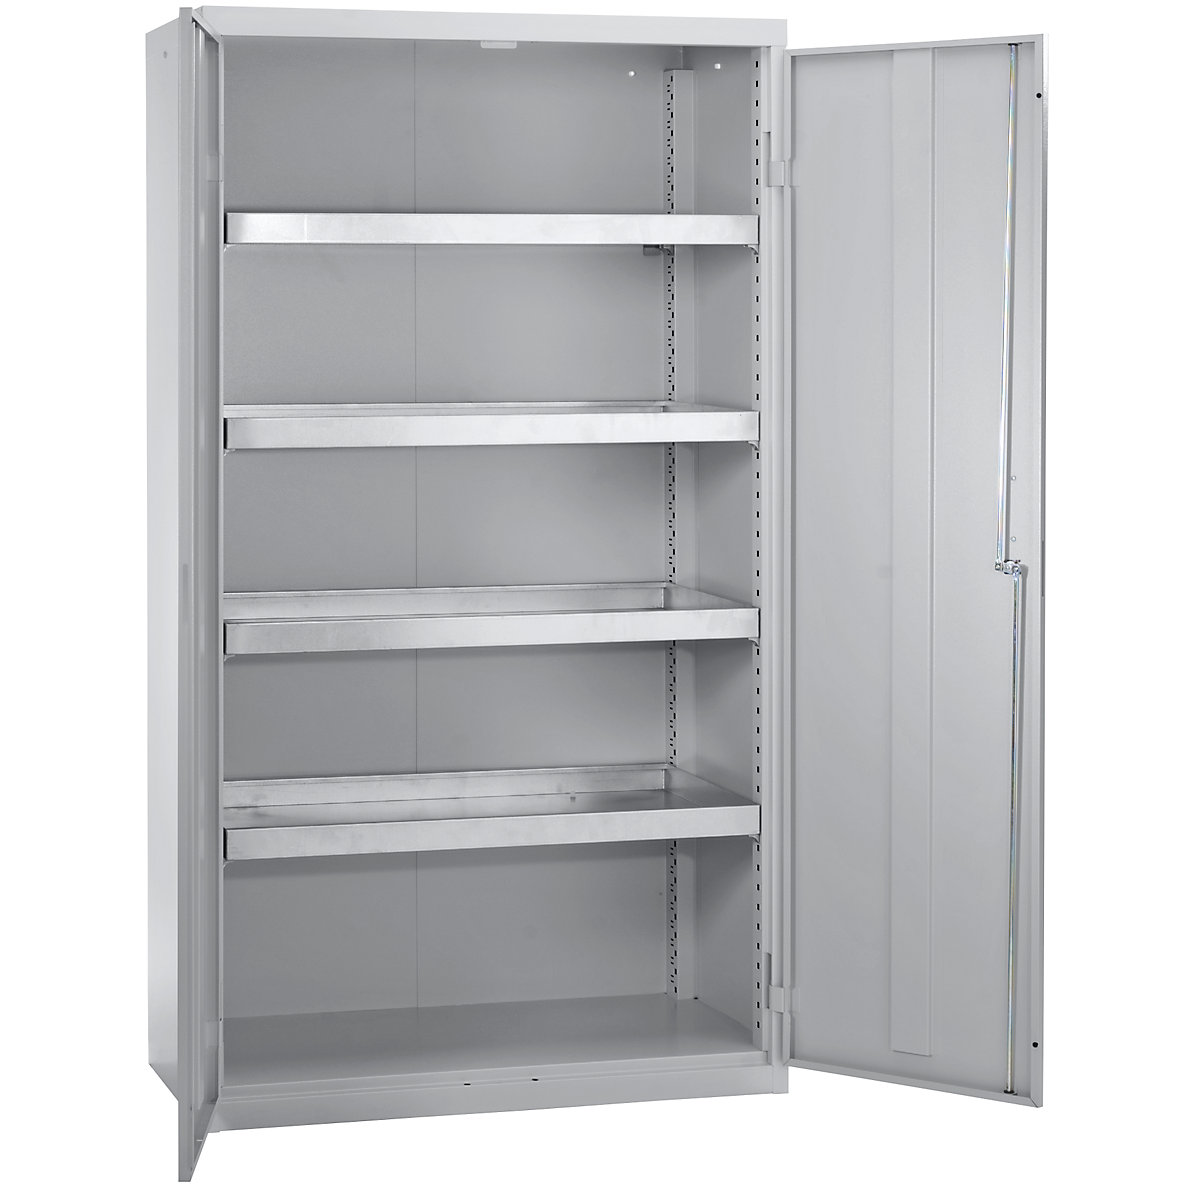 Environmental cupboard without door perforations, HxWxD 1800 x 1000 x 500 mm, 4 tray shelves, light grey / light grey-5